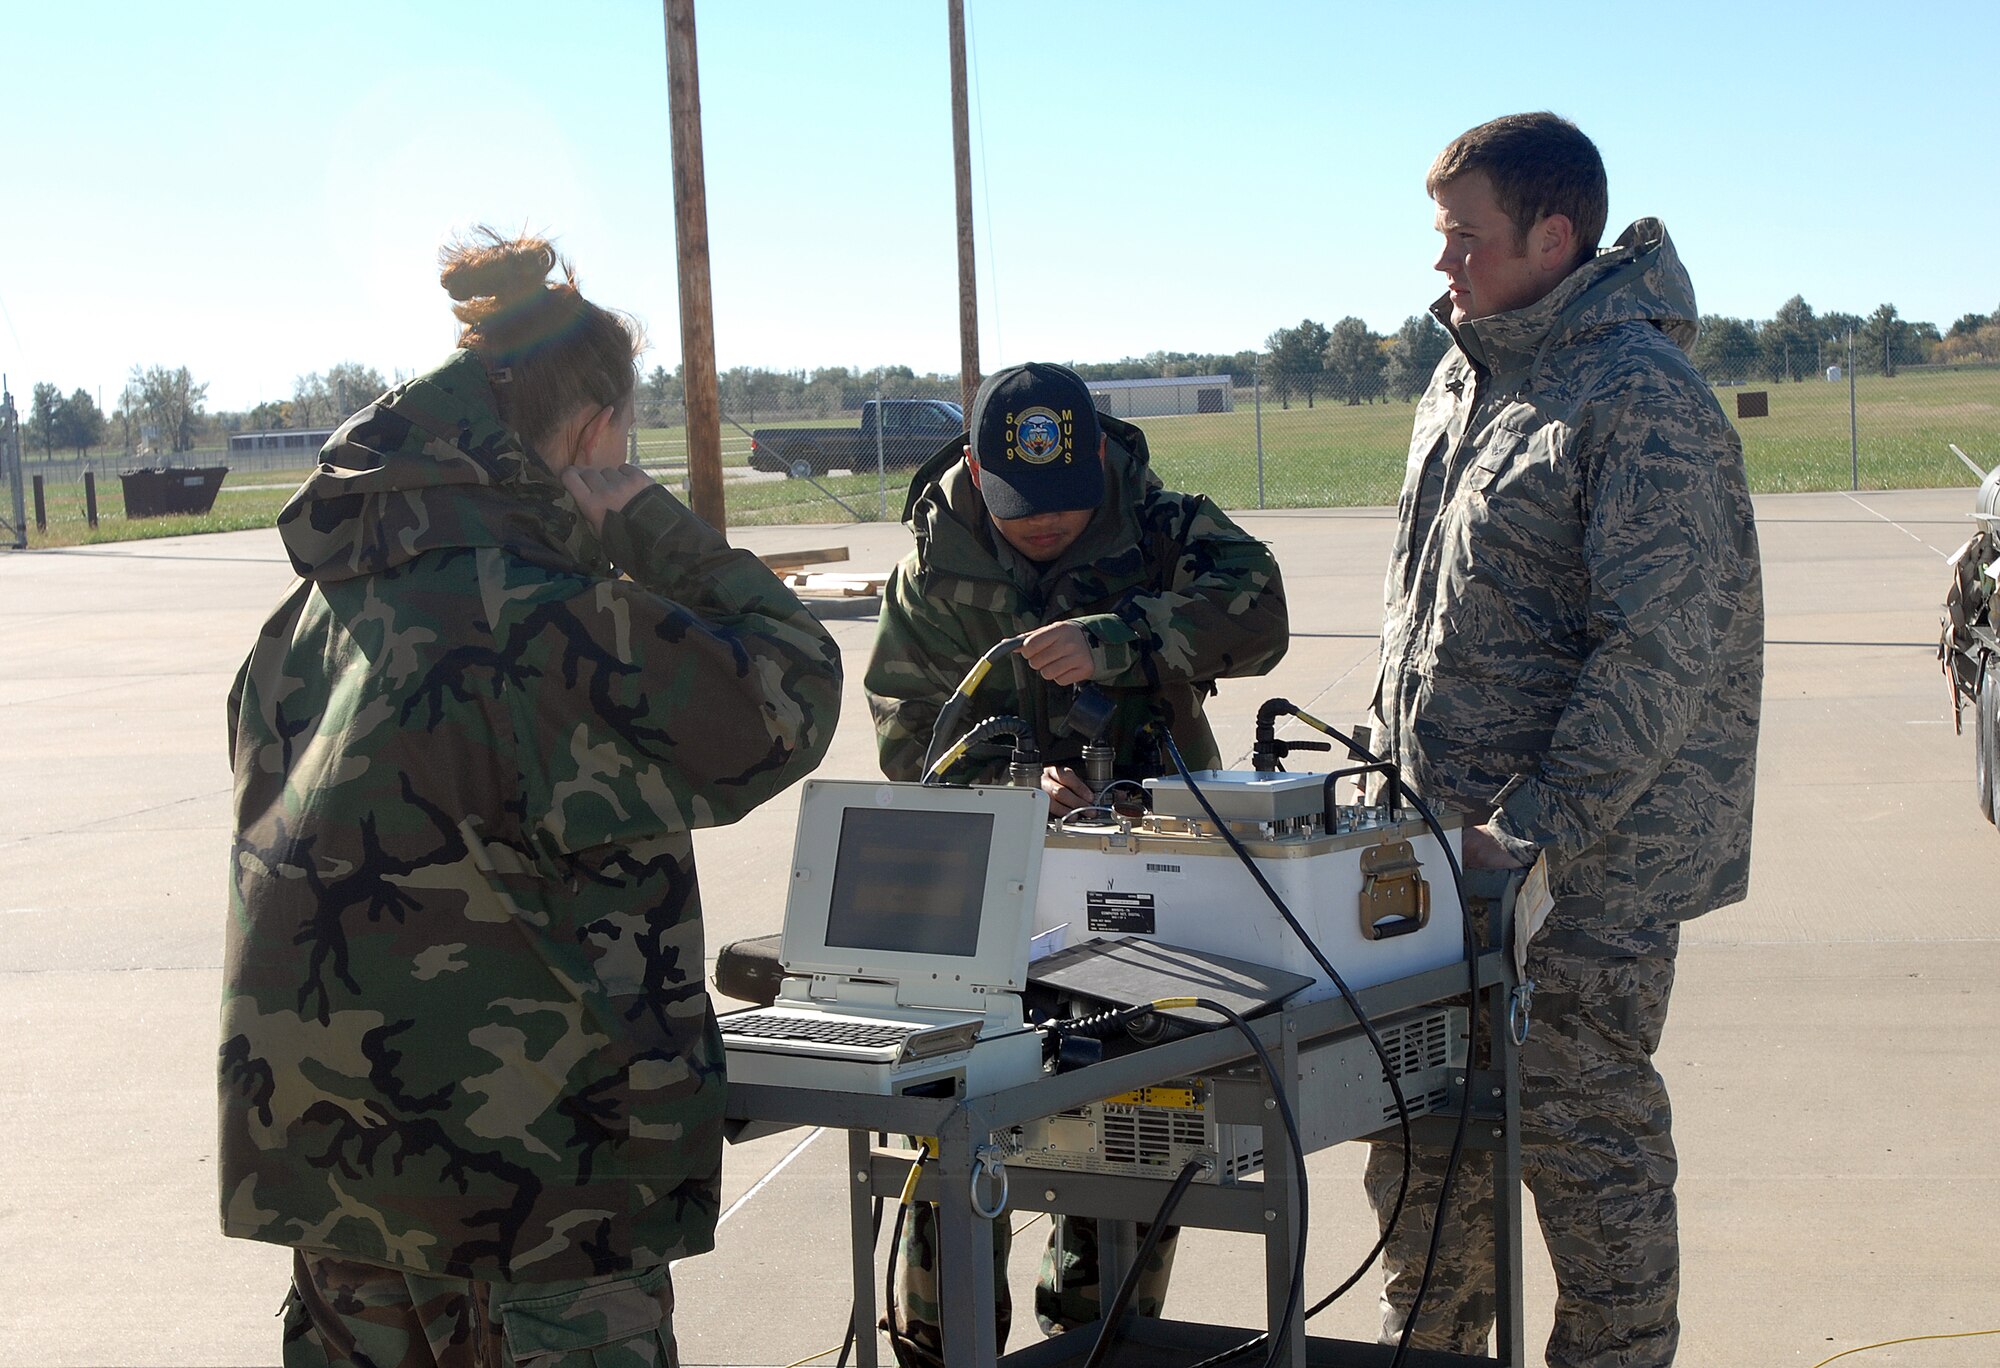 WHITEMAN AIR FORCE BASE, Mo. -- (Left to right) Senior Airman Catrina Maxwell, Airman 1st Class Mark Cruz and Senior Airman Keith Ellis, 509th Munitions Squadron, conduct an initial setup of a test set to perform a software upgrade on the tailkits of Joint Direct Attack Munitions Oct. 24. The crew completed the upgrade on the wing's immediate response war reserve material. (U.S. Air Force photo/Tech. Sgt. Samuel A. Park)